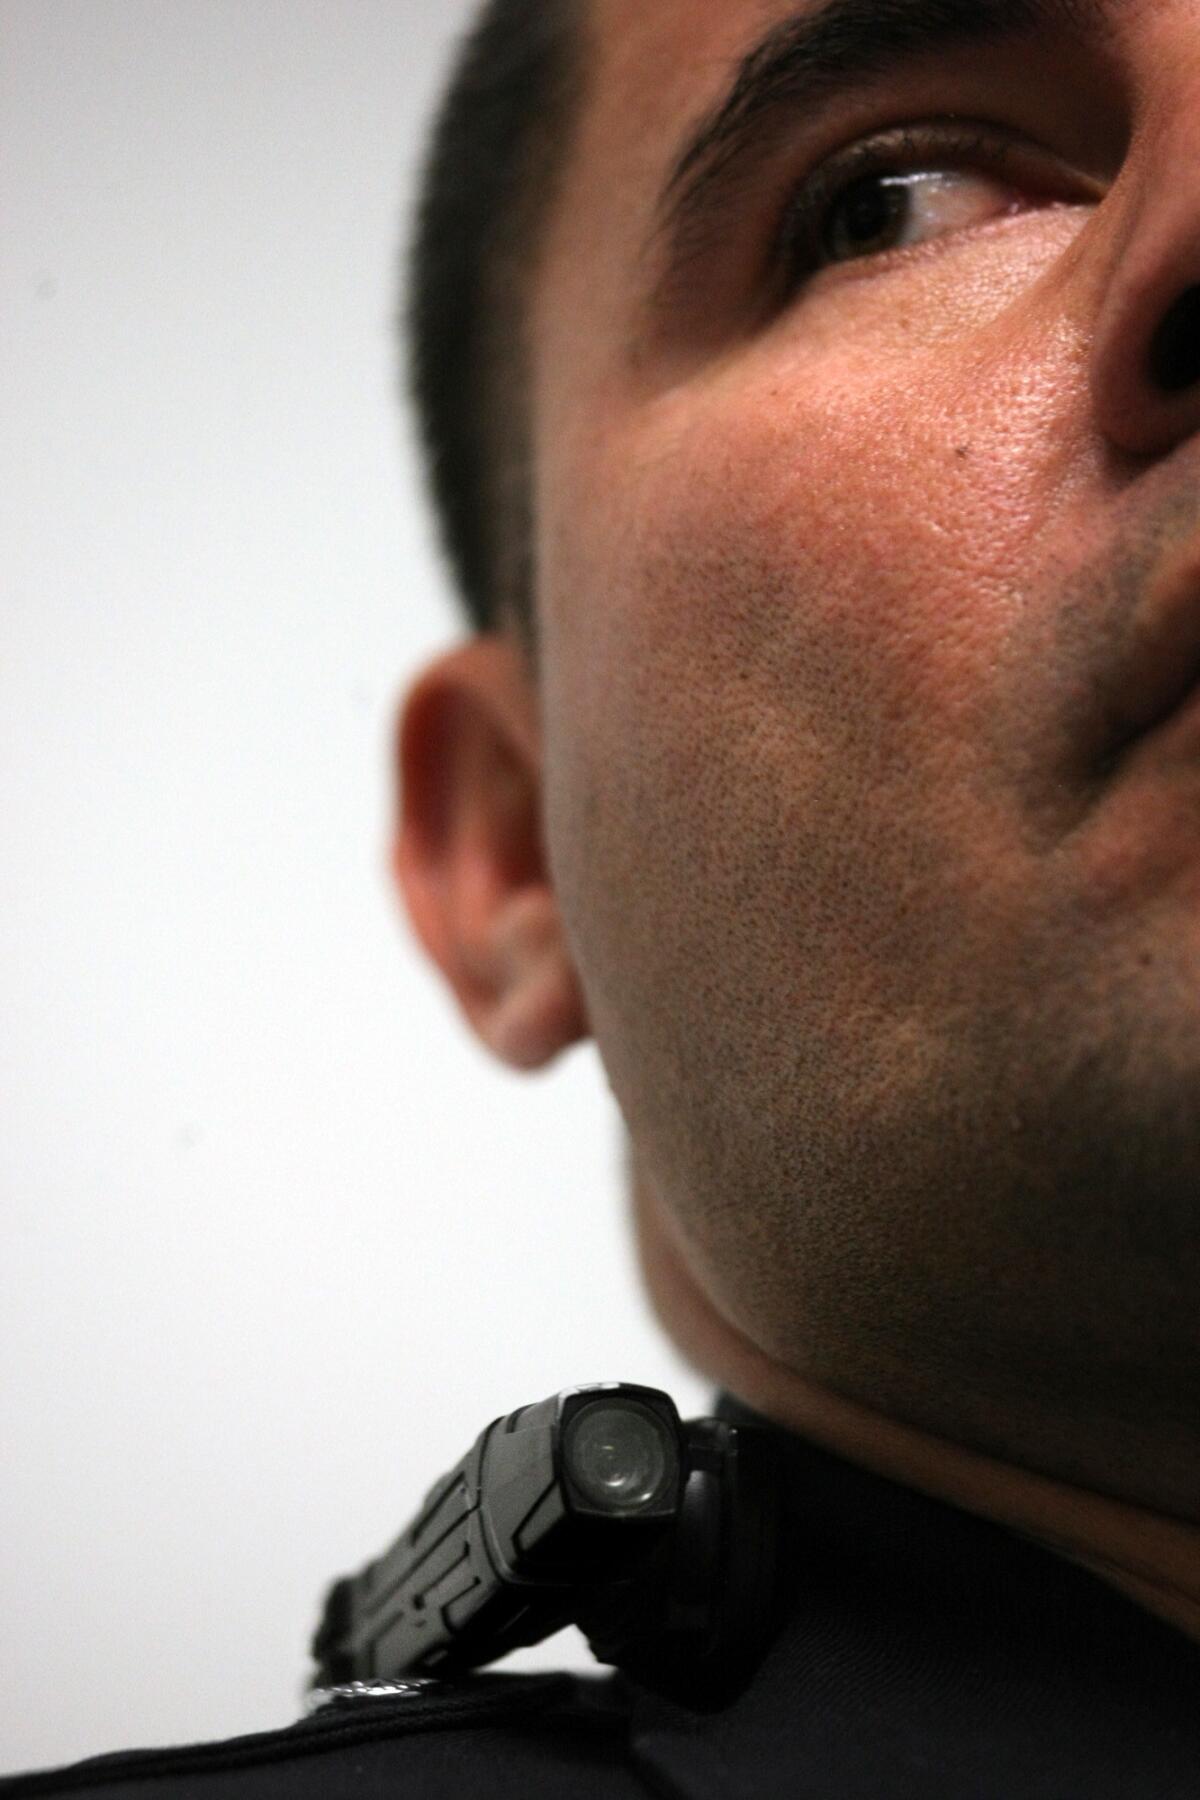 A Los Angeles police officer wears a Taser Axon clip-on camera on his collar at a press conference Wednesday. Police officials announced 30 volunteer officers had begun testing the cameras as part of a pilot program.